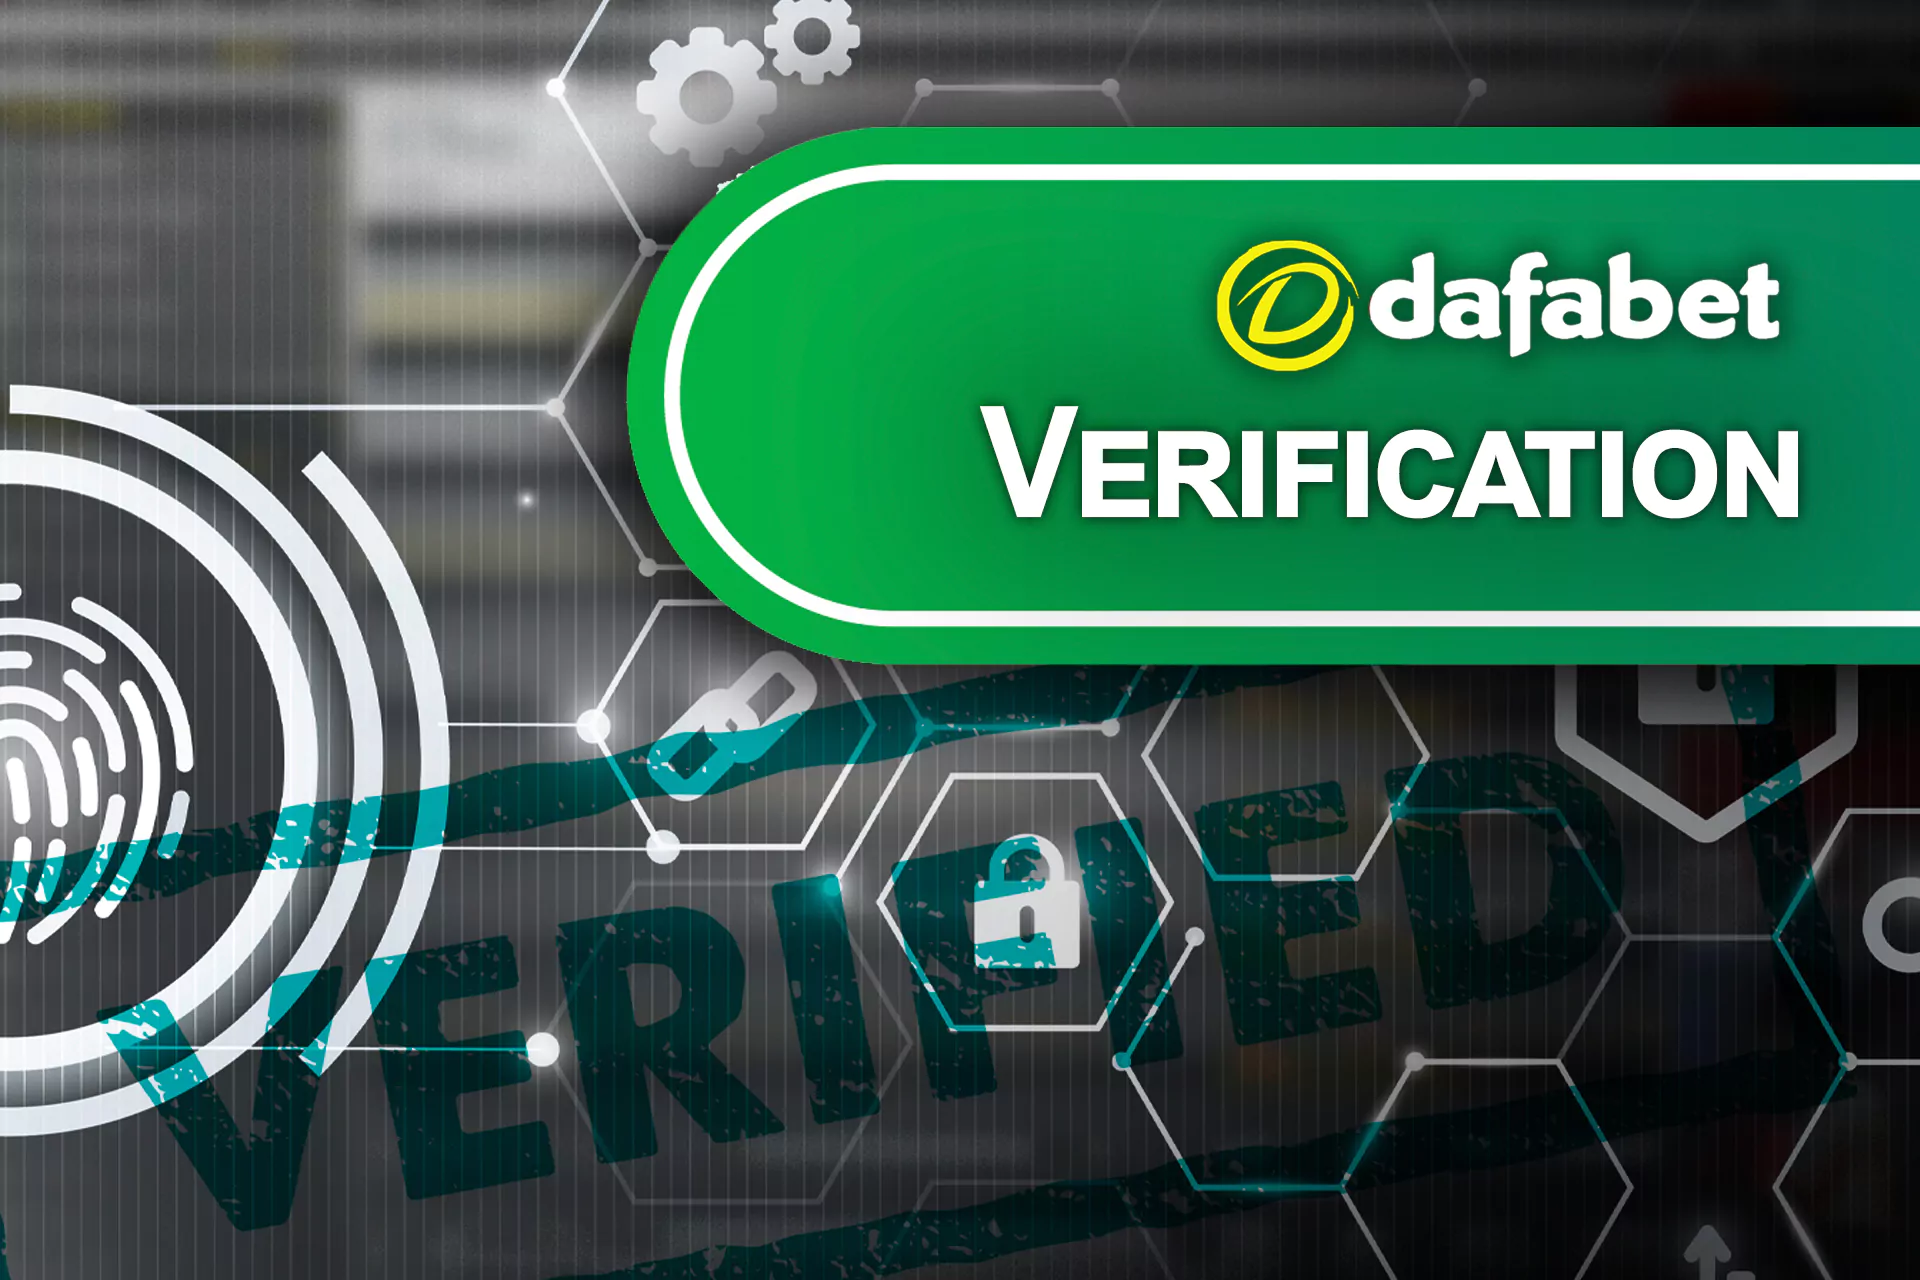 To verify your Dafabet account, upload scans of the documents that the bookmaker asks for.